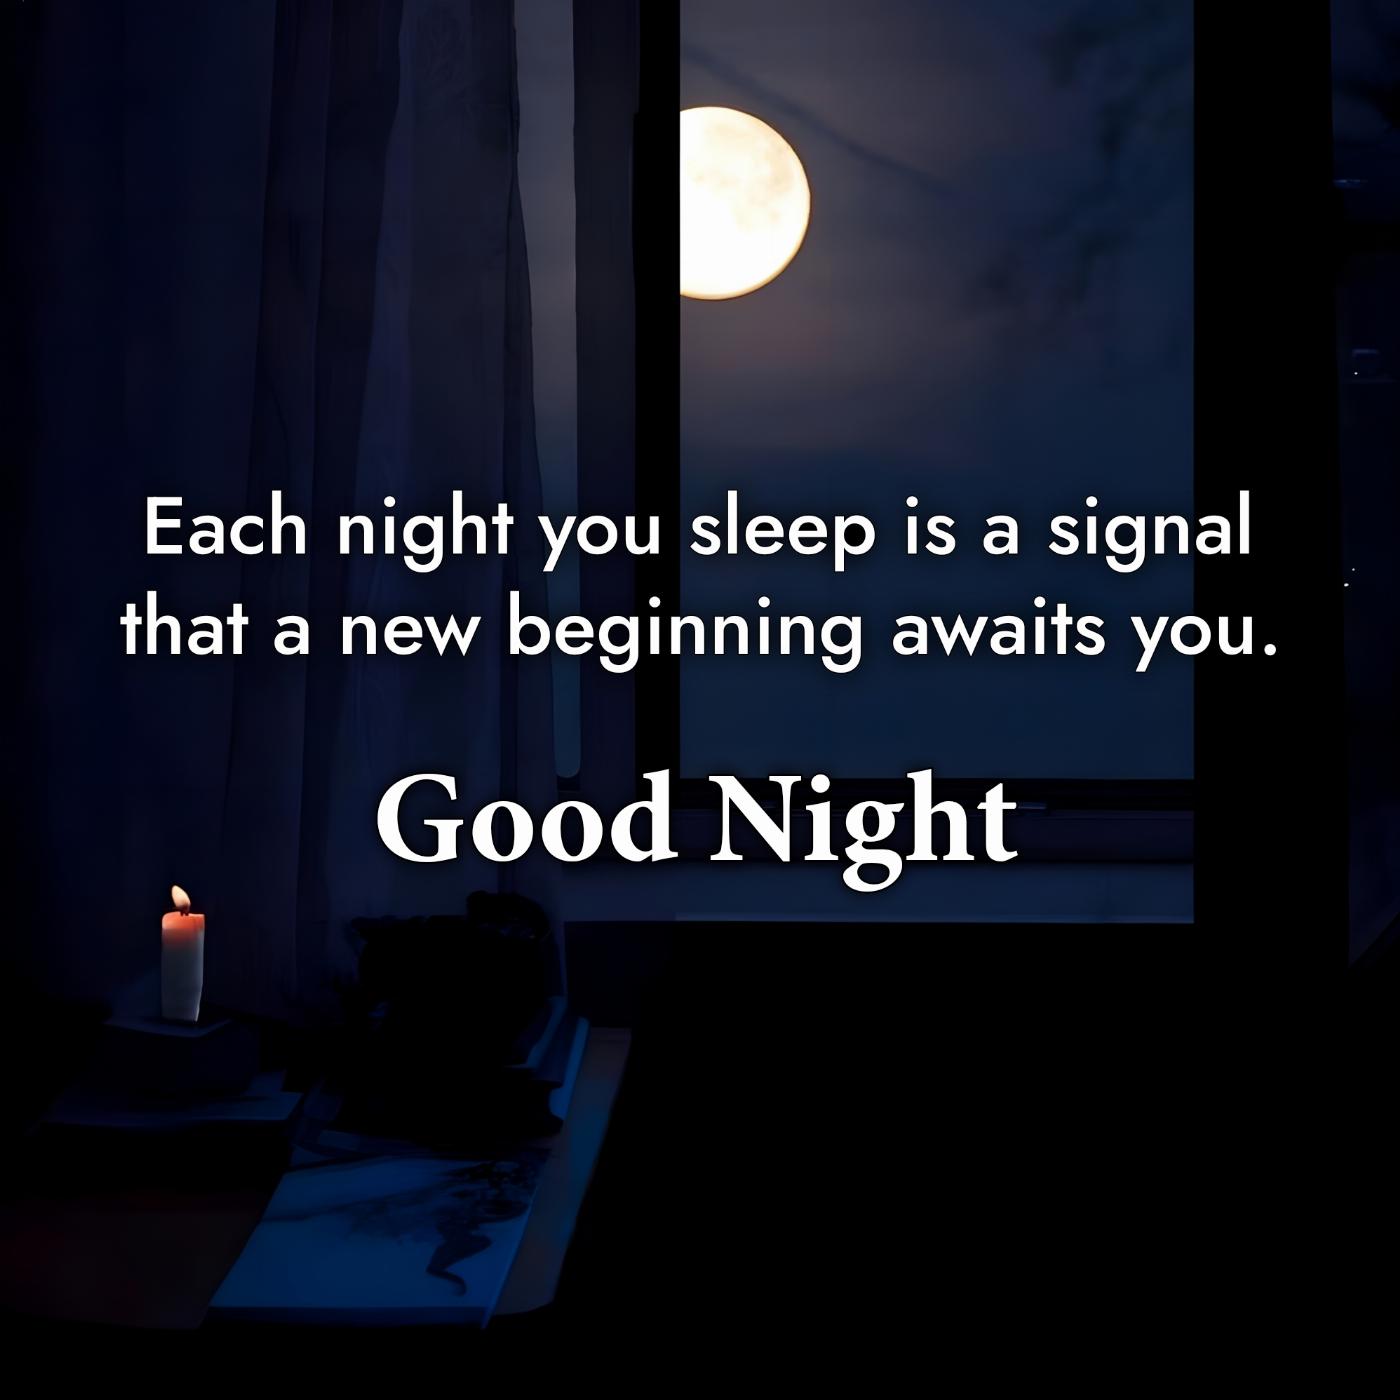 Each night you sleep is a signal that a new beginning